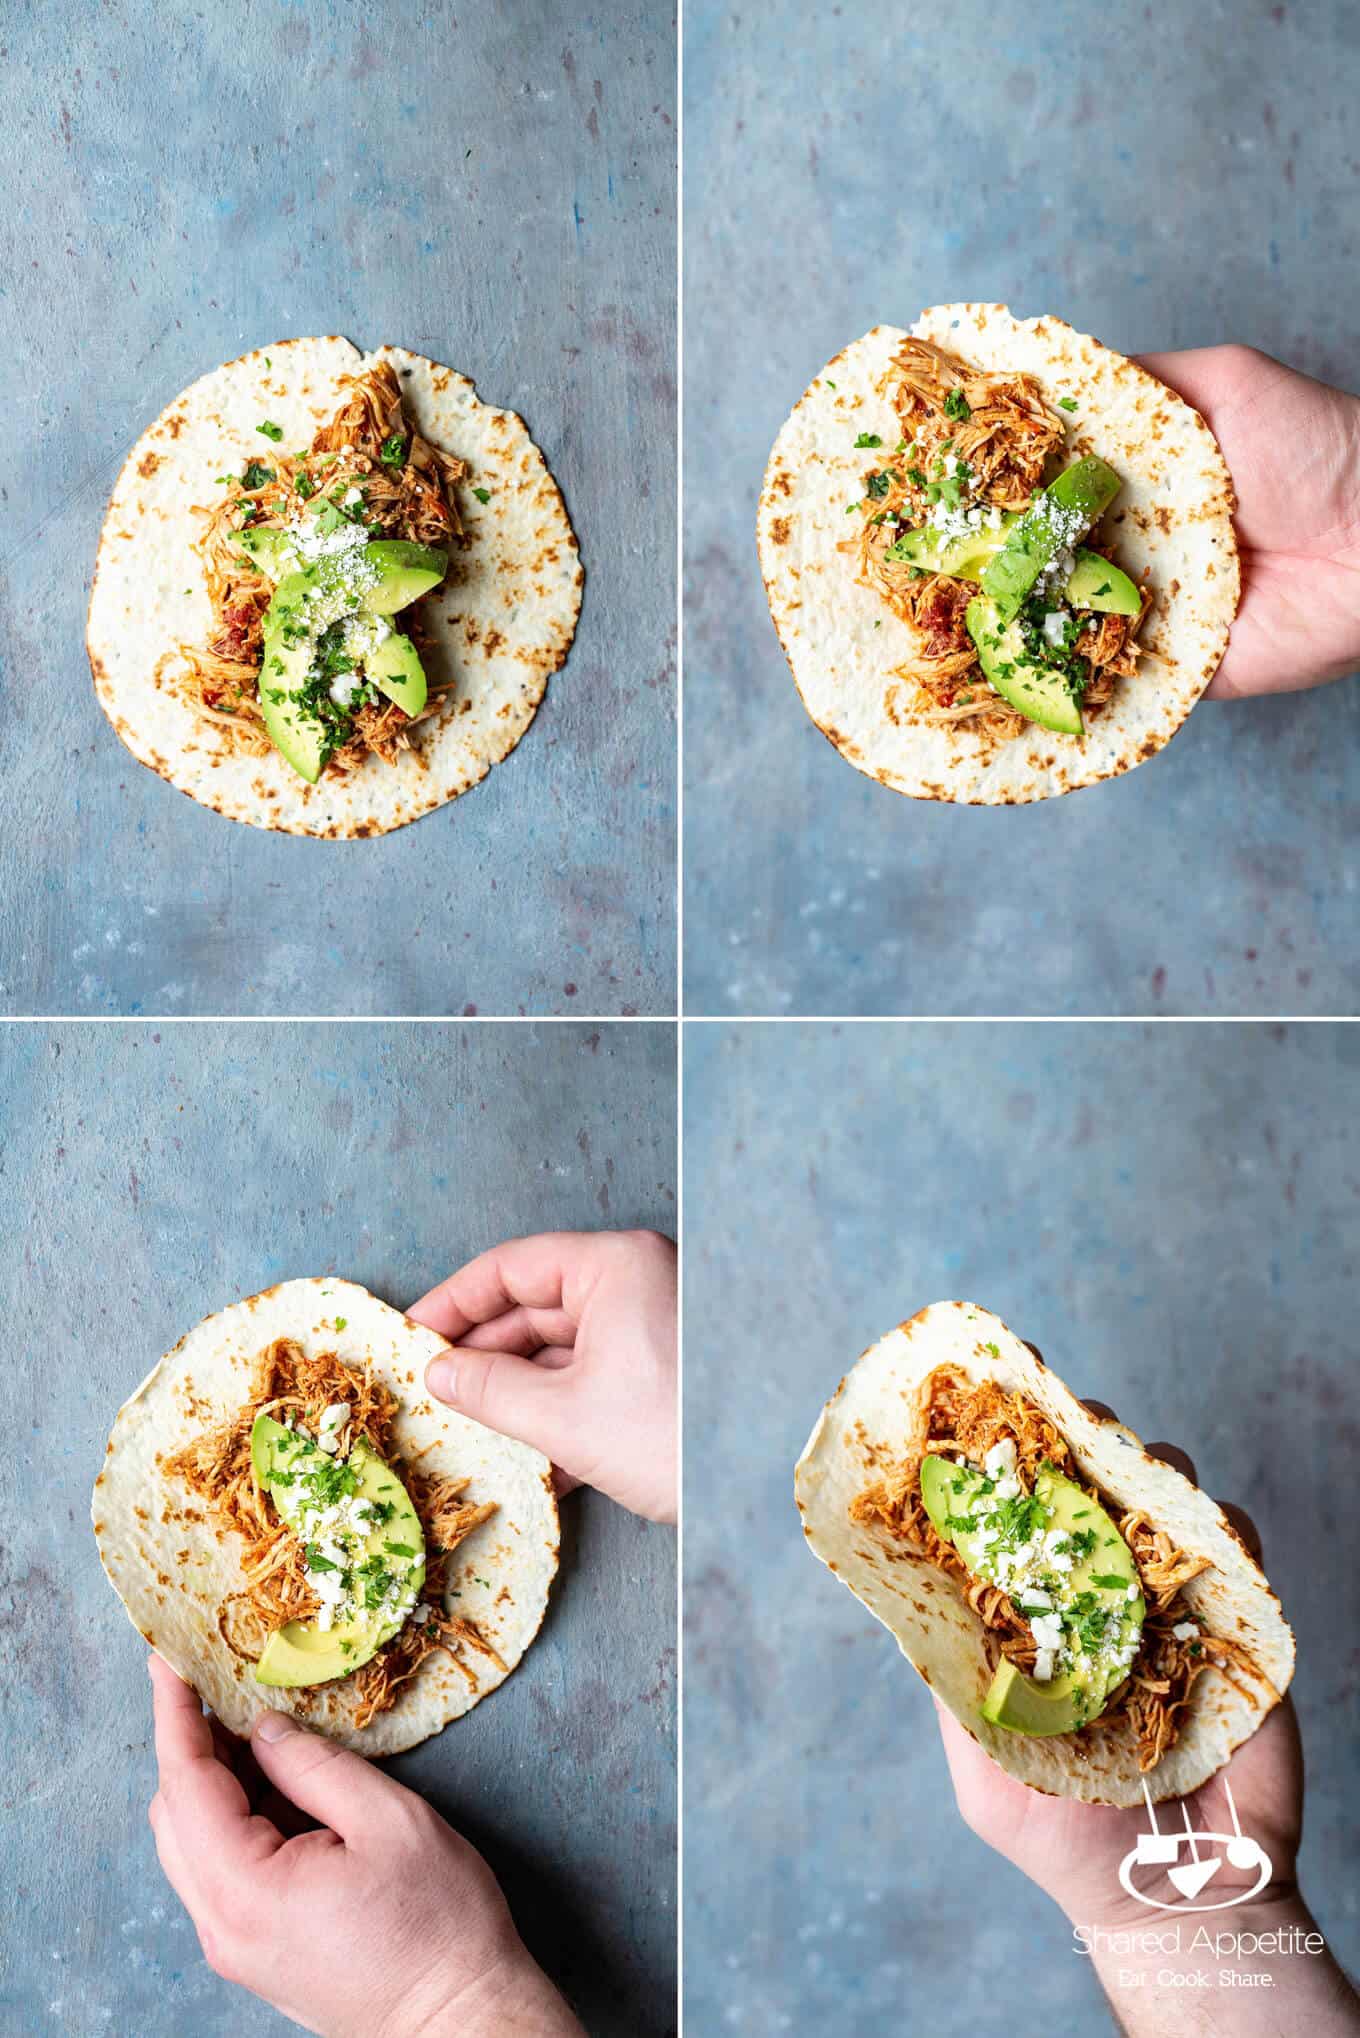 Picking up ready to eat these Slow Cooker Salsa Chicken Tacos | sharedappetite.com